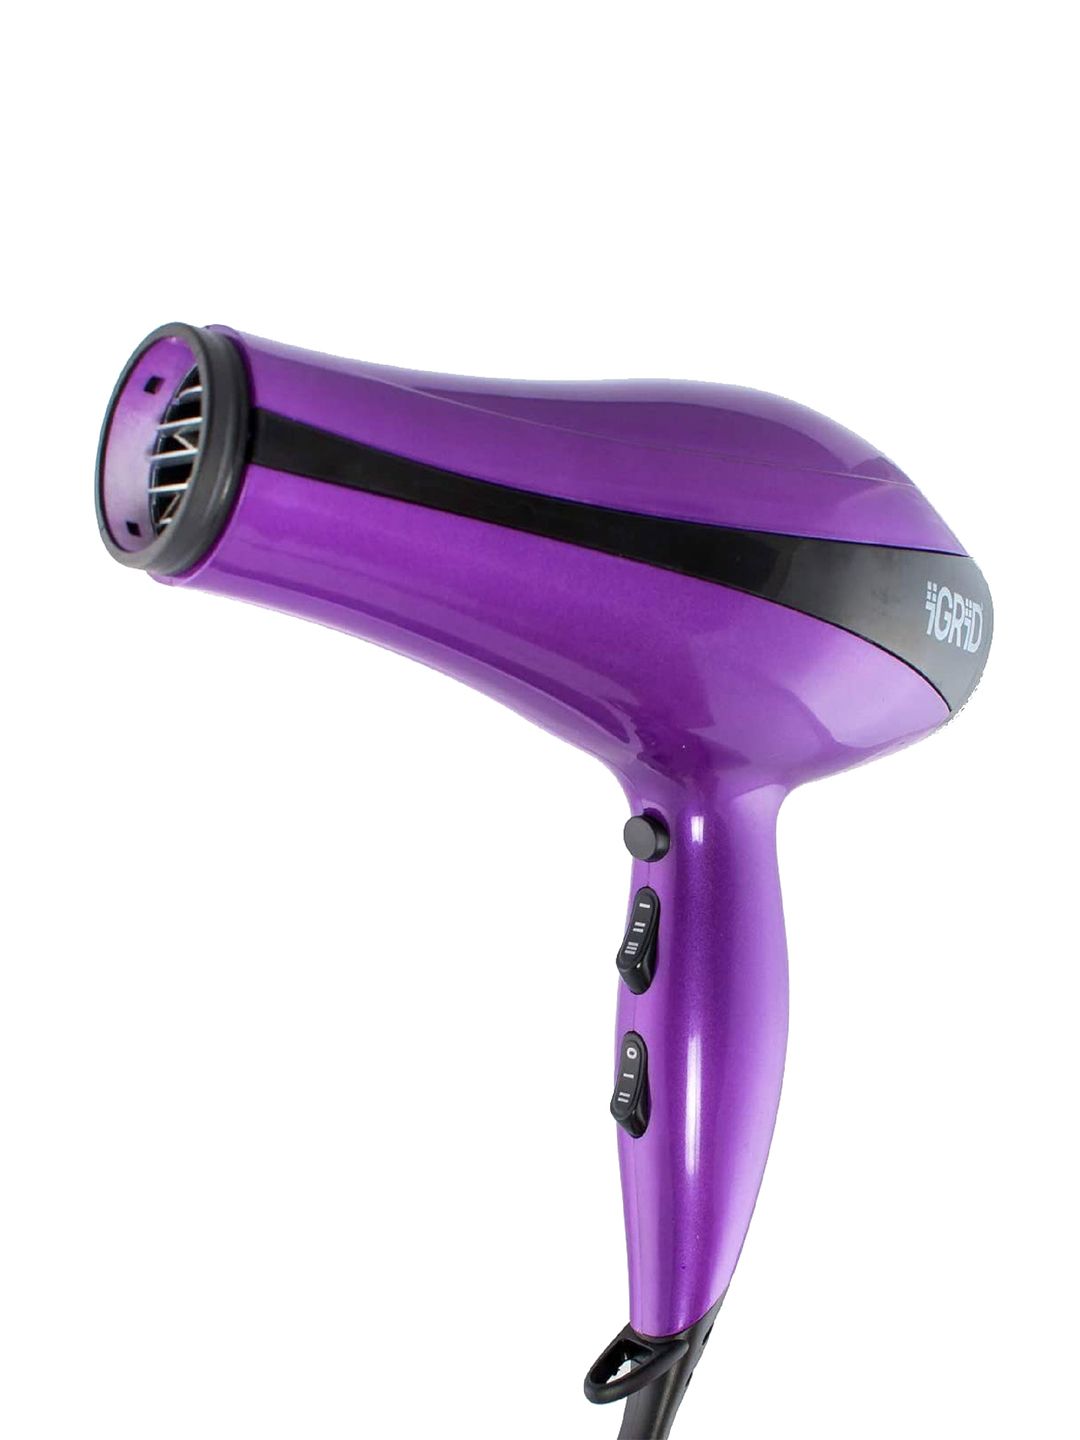 iGRiD BLHC-1645 Professional Powerful Hair Dryer 2200W Detachable Concentrator - Purple Price in India